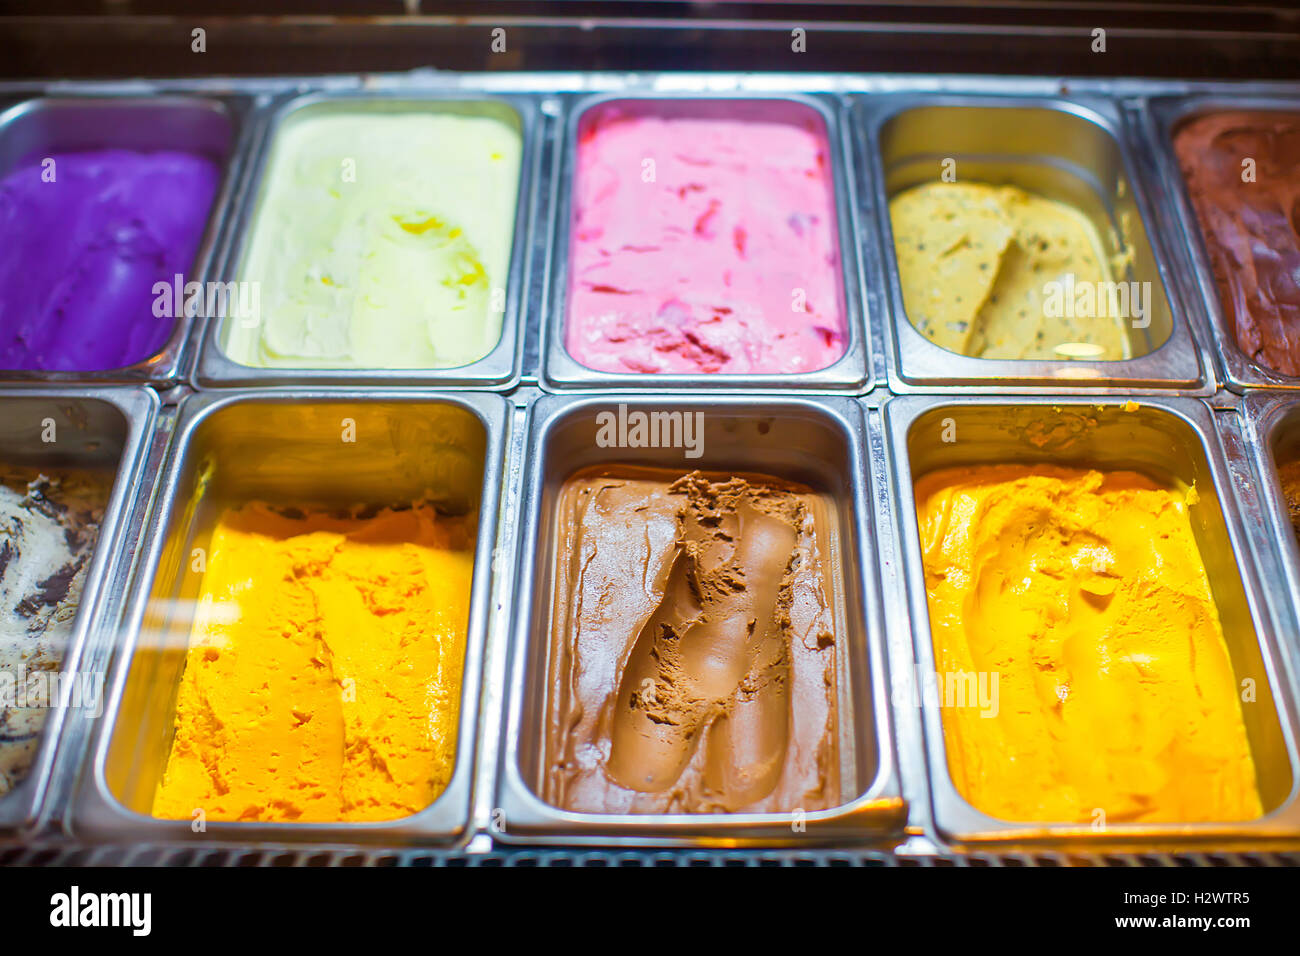 https://c8.alamy.com/comp/H2WTR5/containers-of-different-sweet-ice-cream-H2WTR5.jpg